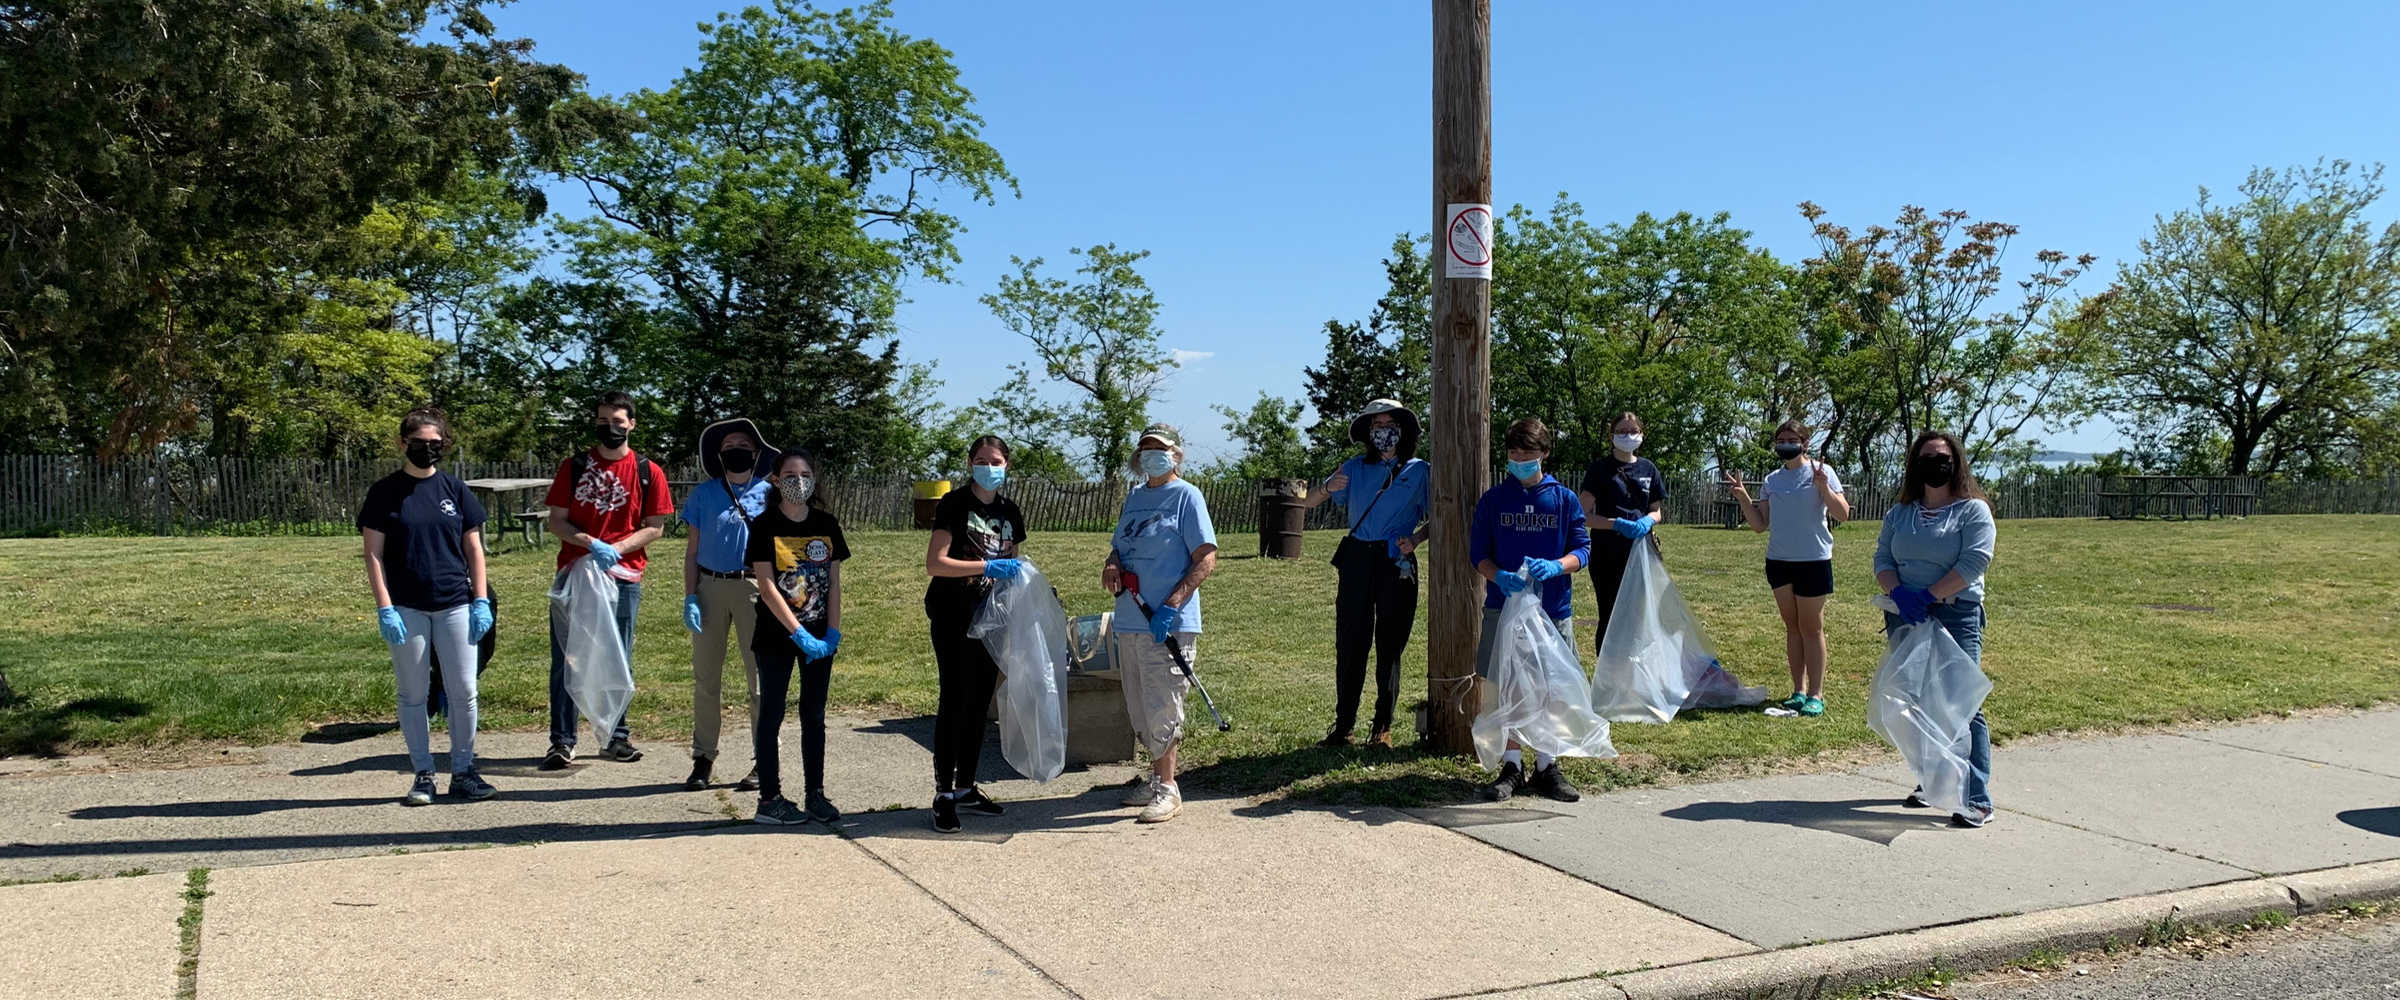 A group of people stand spread out along a sidewalk in front of a grassy park area. They are holding tools and plastic bags before setting off on a beach cleanup.